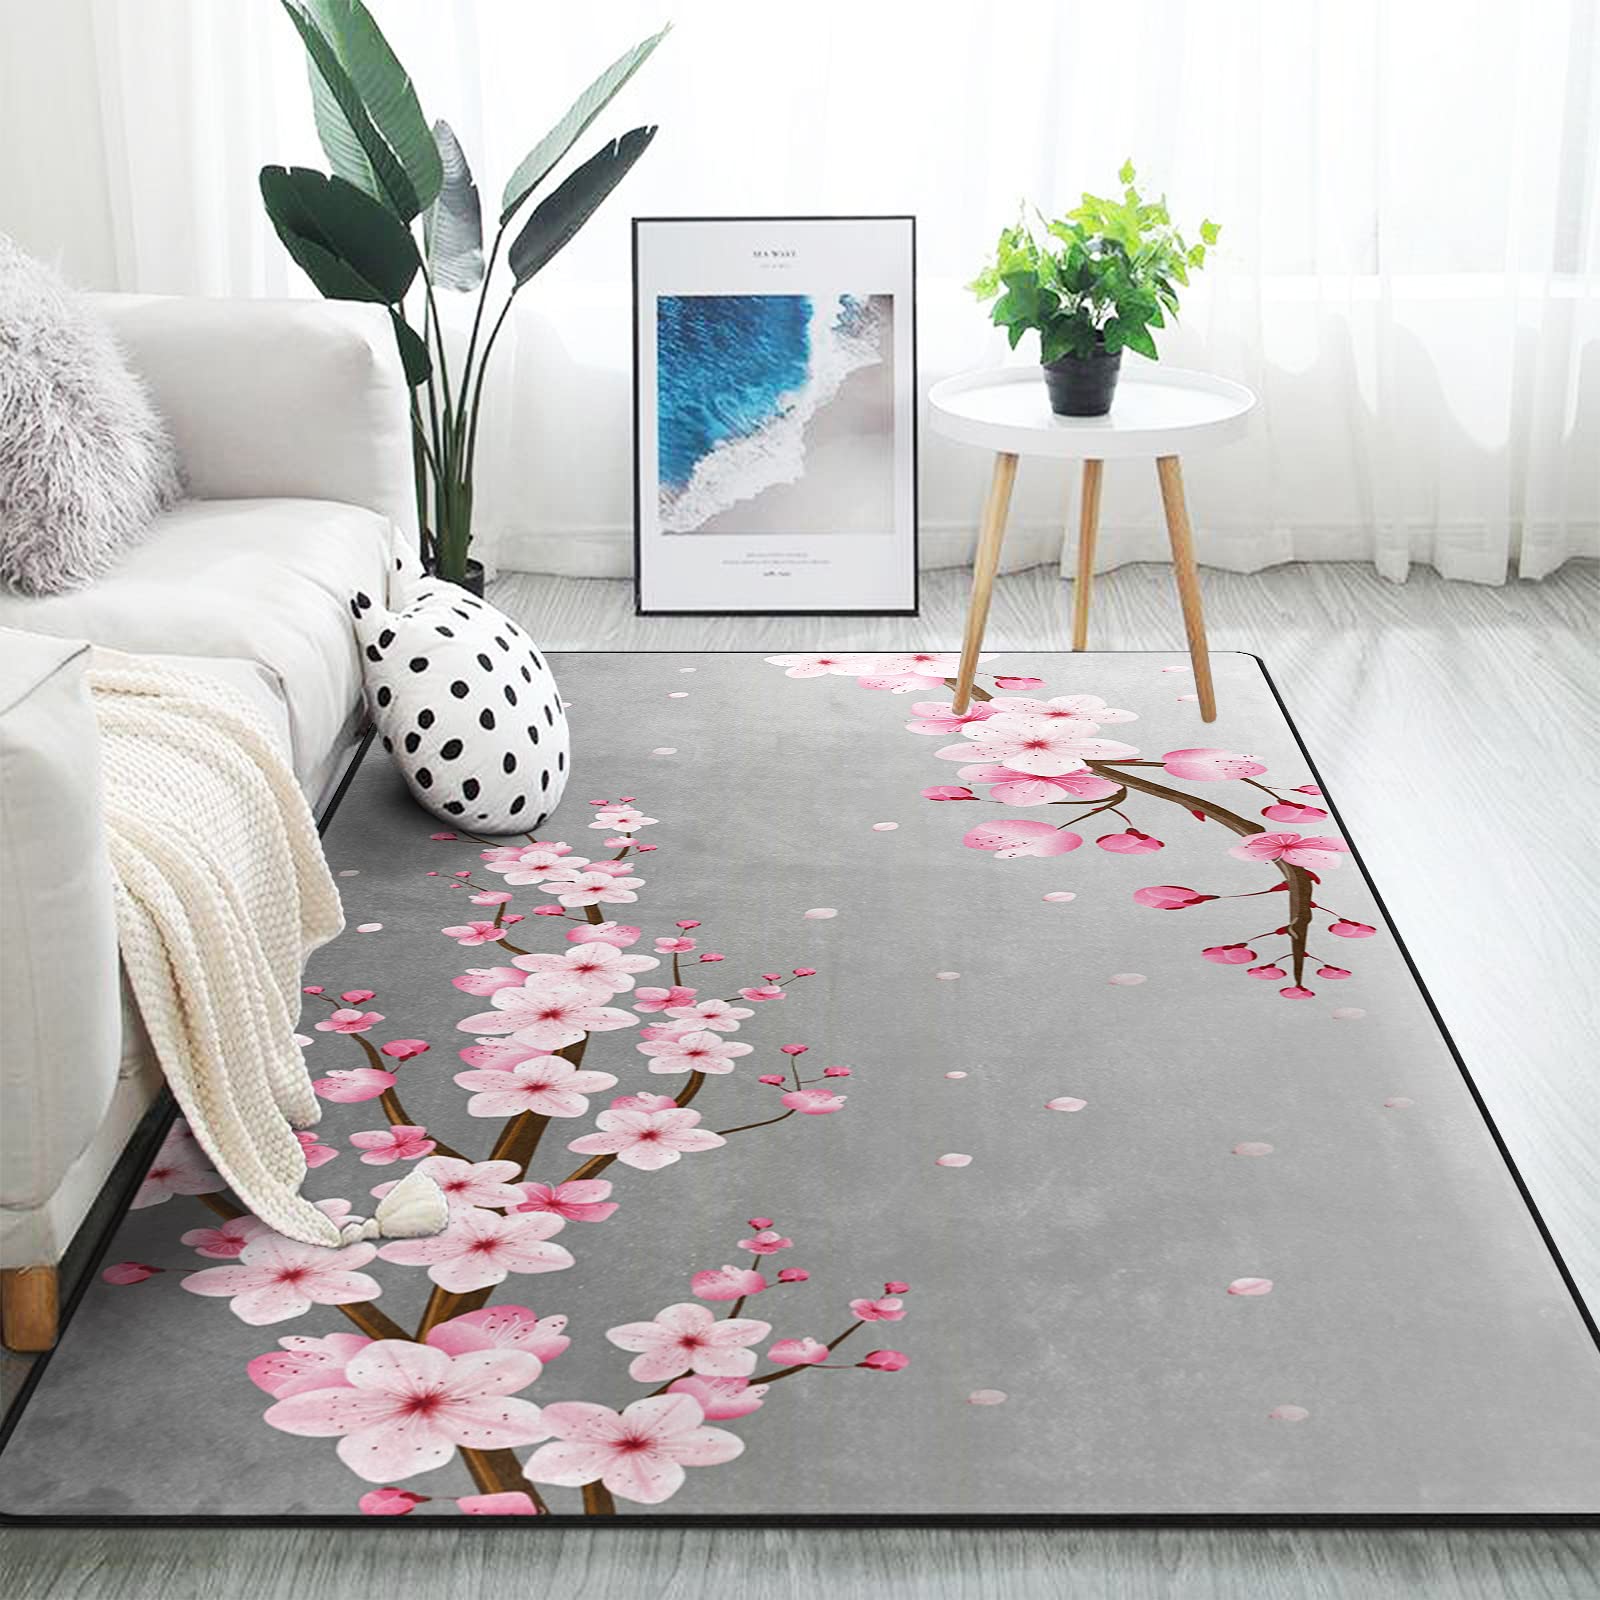 ALAZA Japanese Oriental Cherry Blossom Area Rug Rugs for Living Room Bedroom 7' x 5'